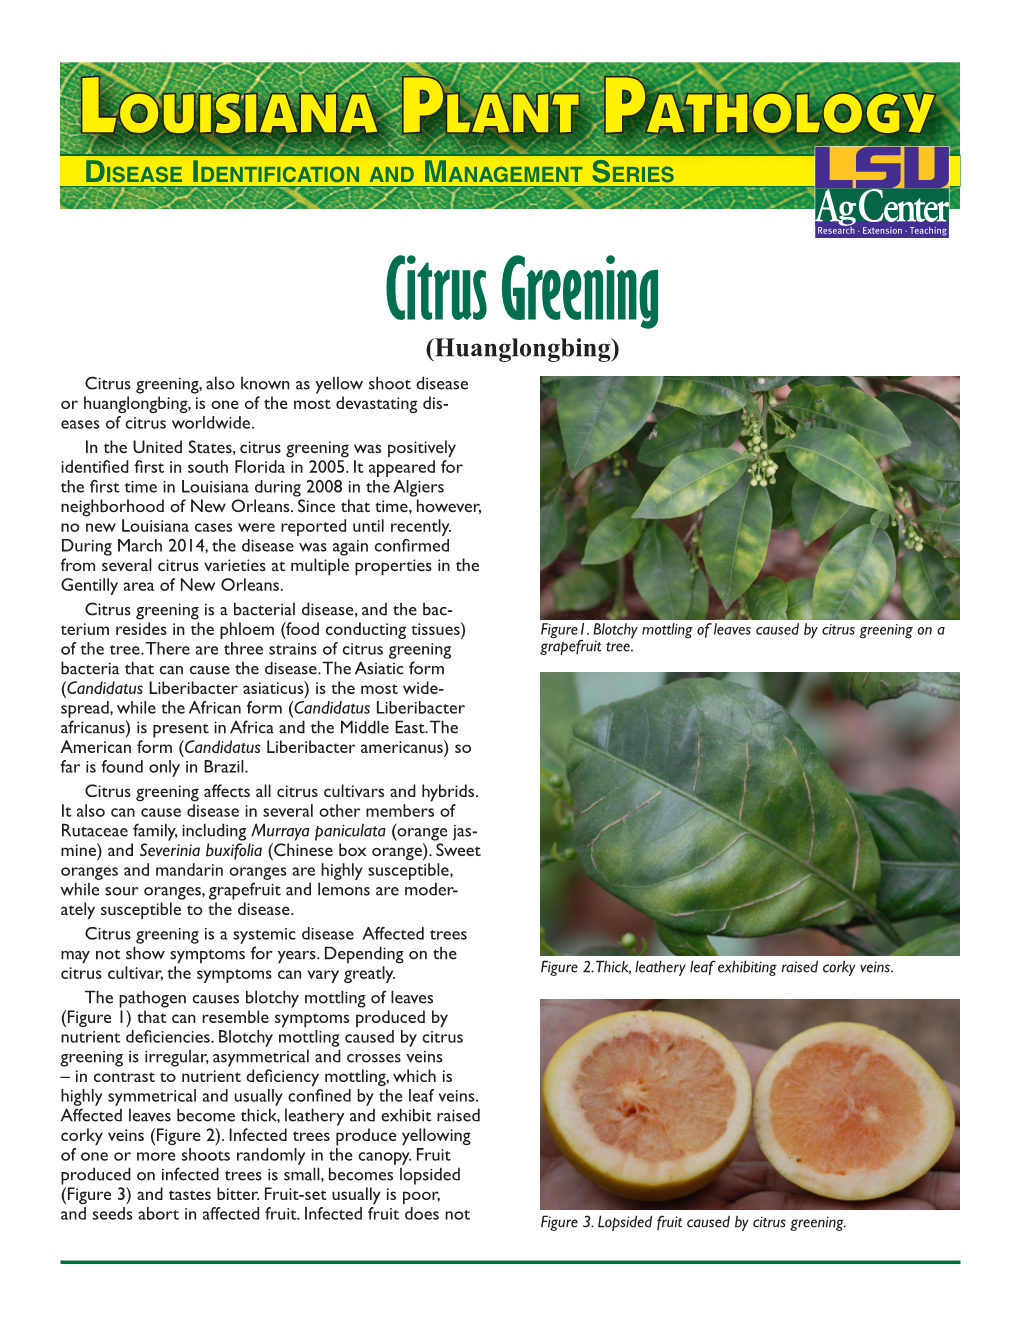 Citrus Greening (Huanglongbing) Citrus Greening, Also Known As Yellow Shoot Disease Or Huanglongbing, Is One of the Most Devastating Dis- Eases of Citrus Worldwide